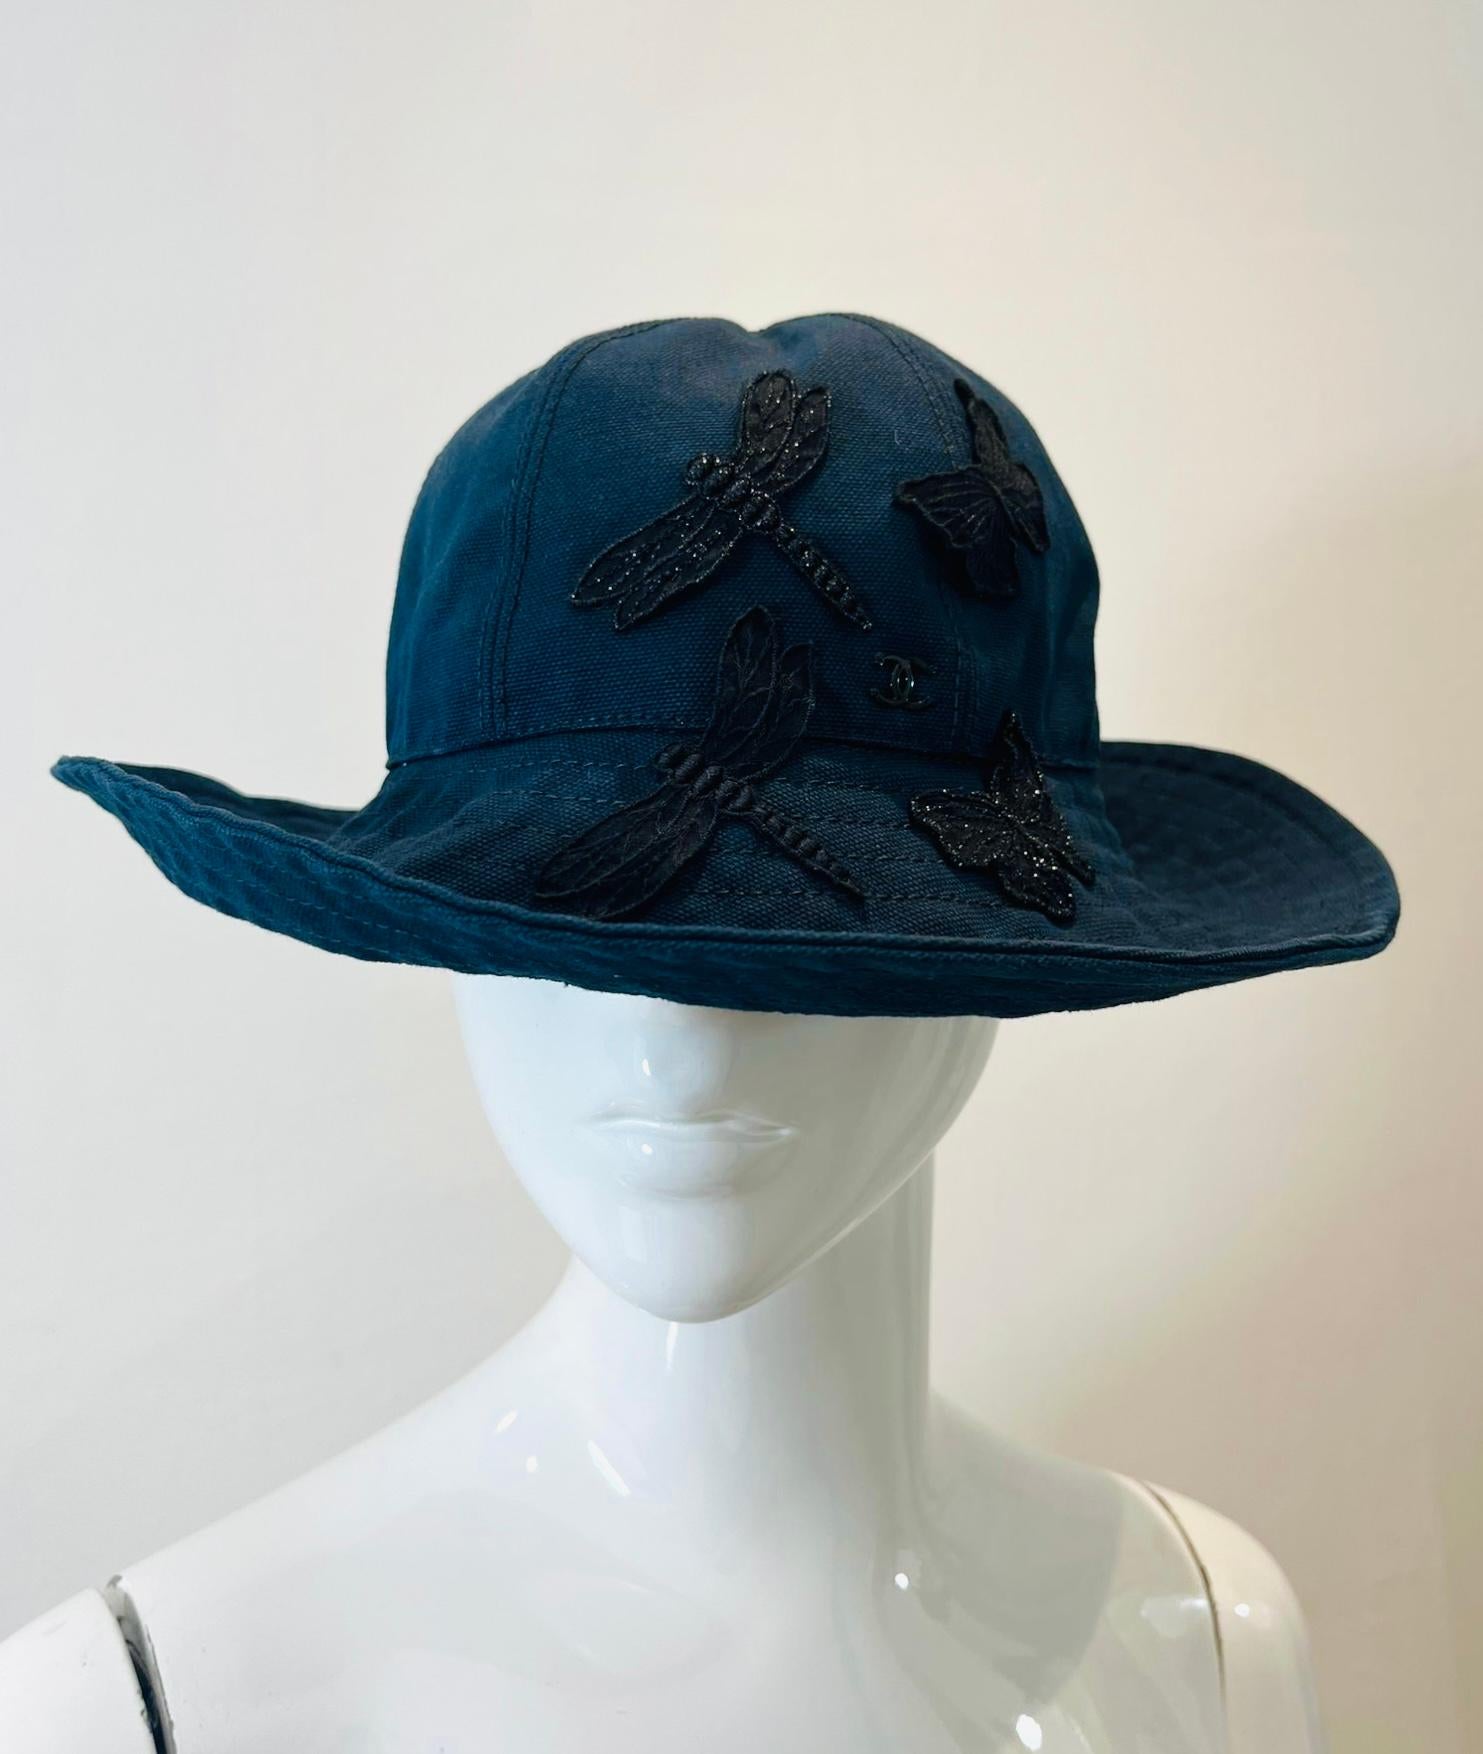 Chanel 'CC' Logo Butterfly Embellished Cotton Hat

Navy blue hat designed with black butterfly and dragonfly adornments accented with lace and sparkling silver threads.

Featuring black 'CC' logo detail and satin lined interior.

Size – 